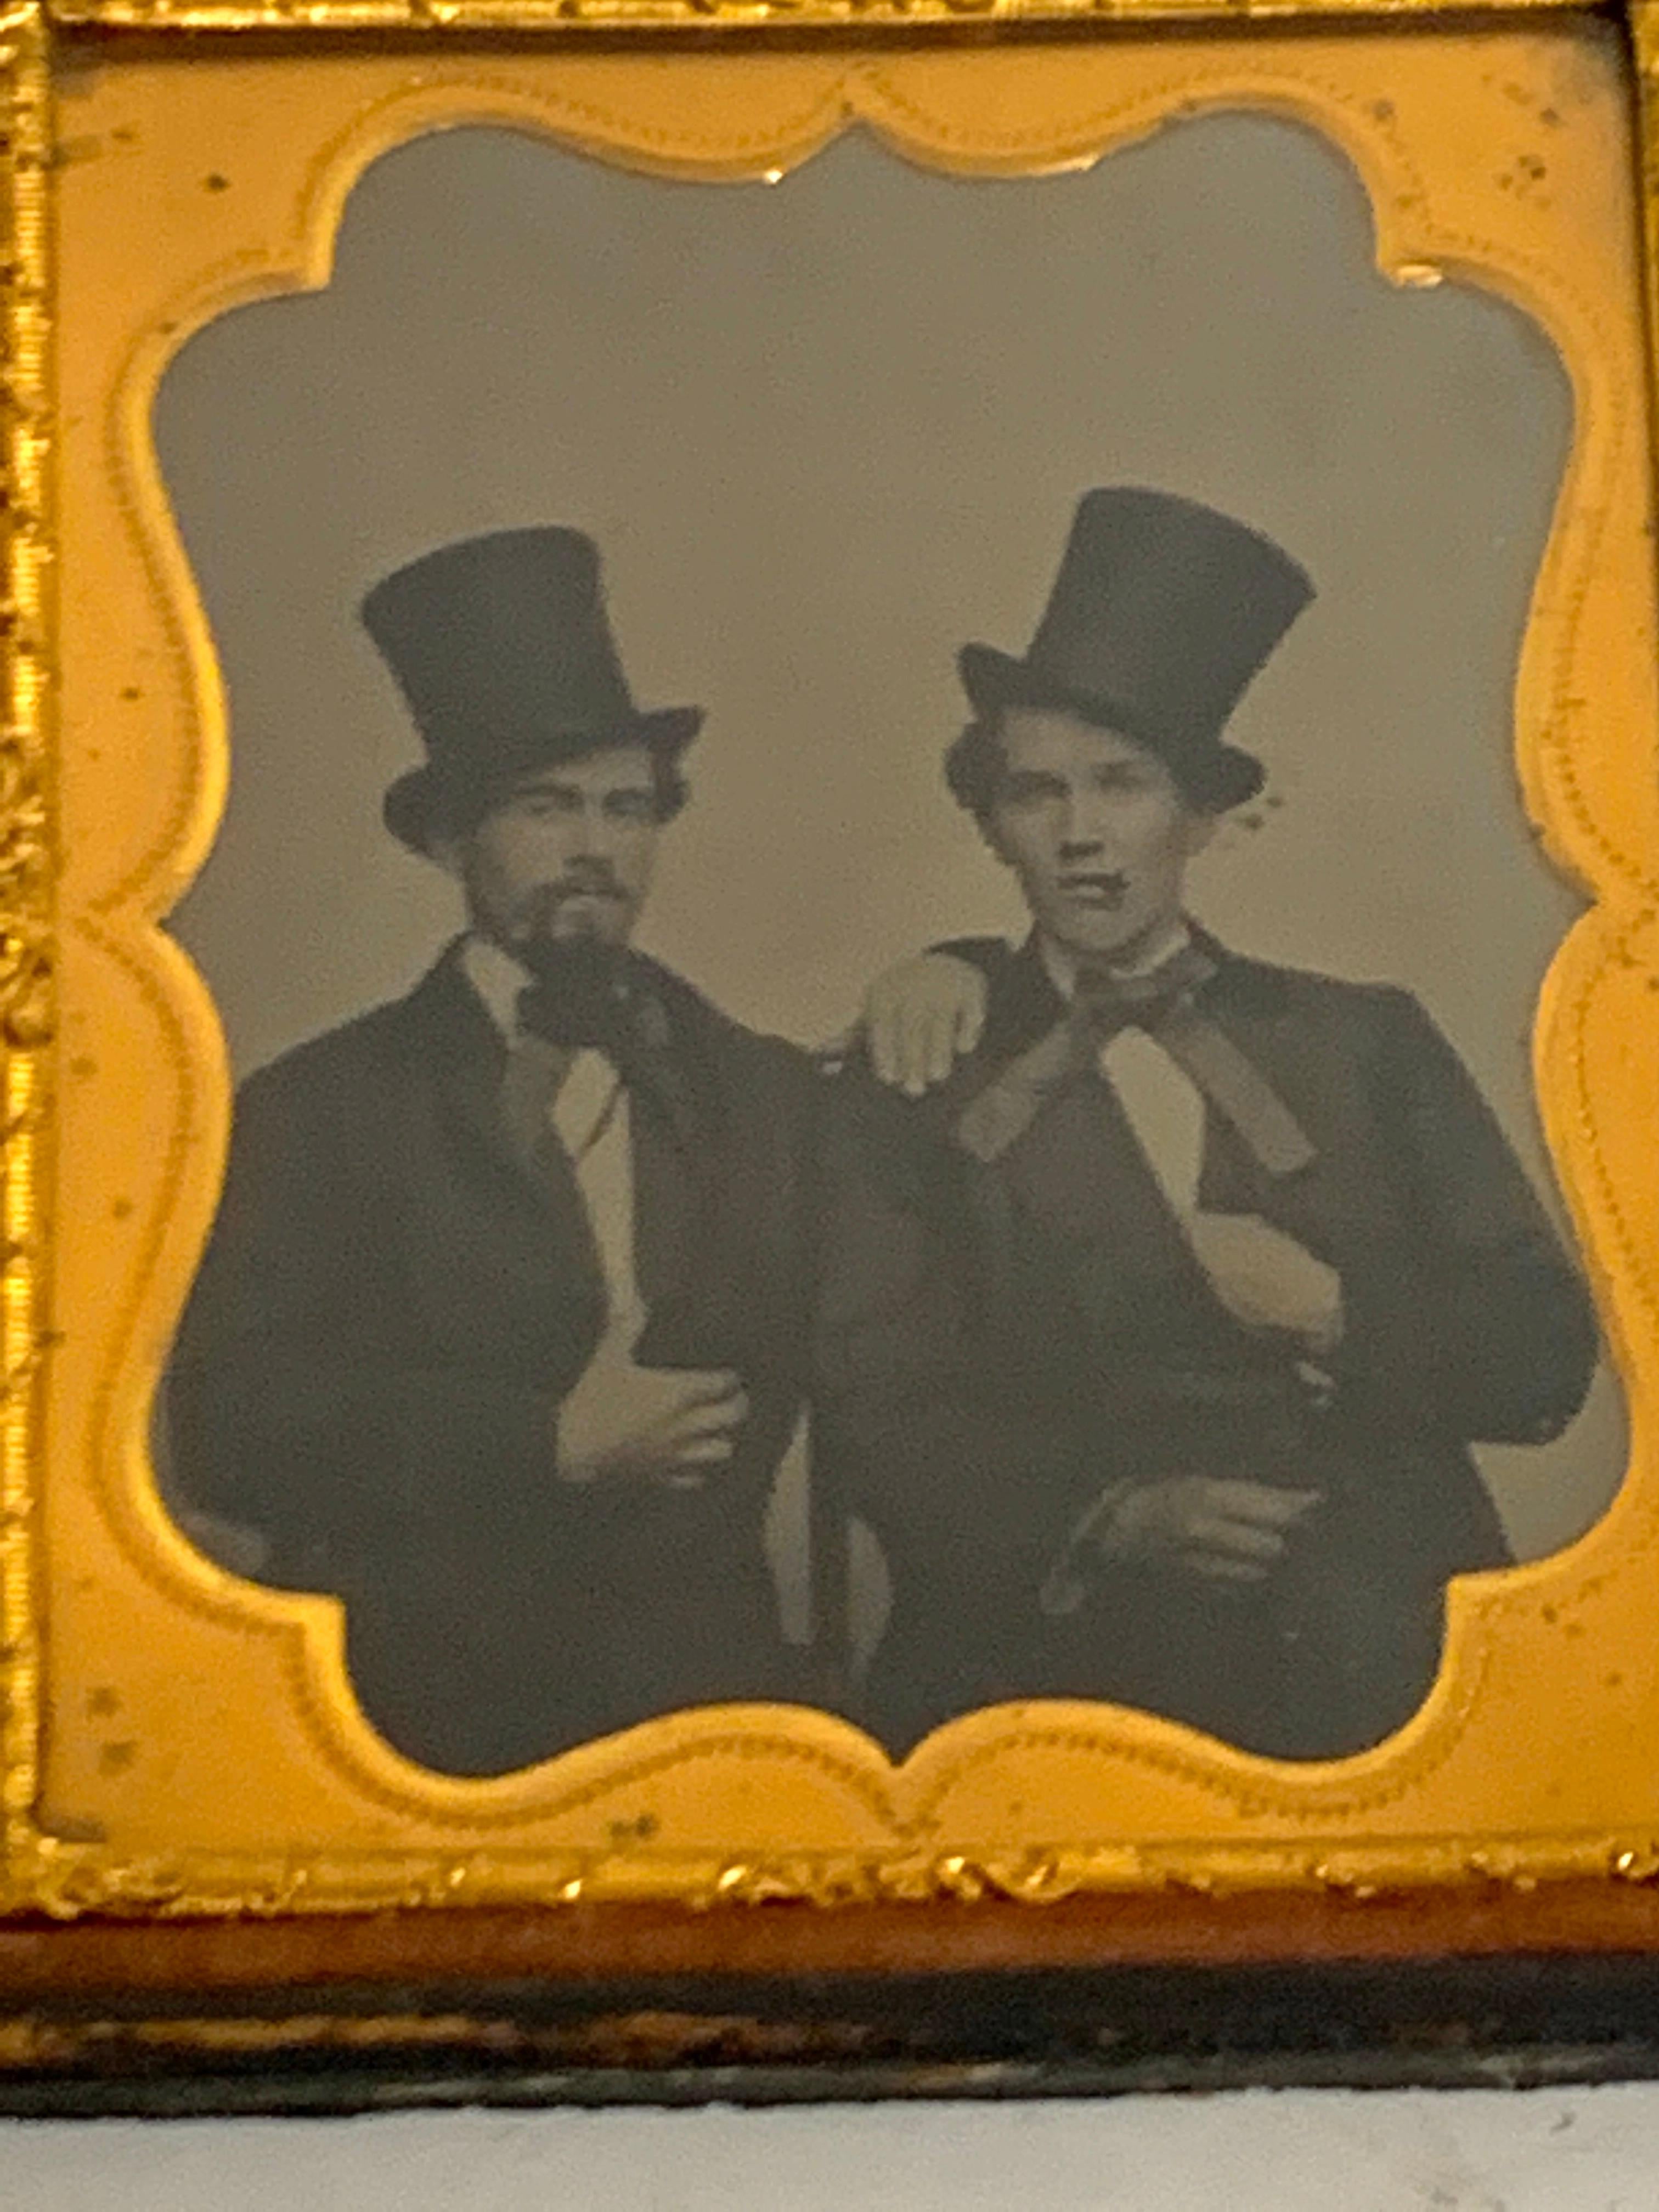 Leather Daguerreotype Portrait of Two Men Embracing, Smoking with Ties and Top Hats For Sale